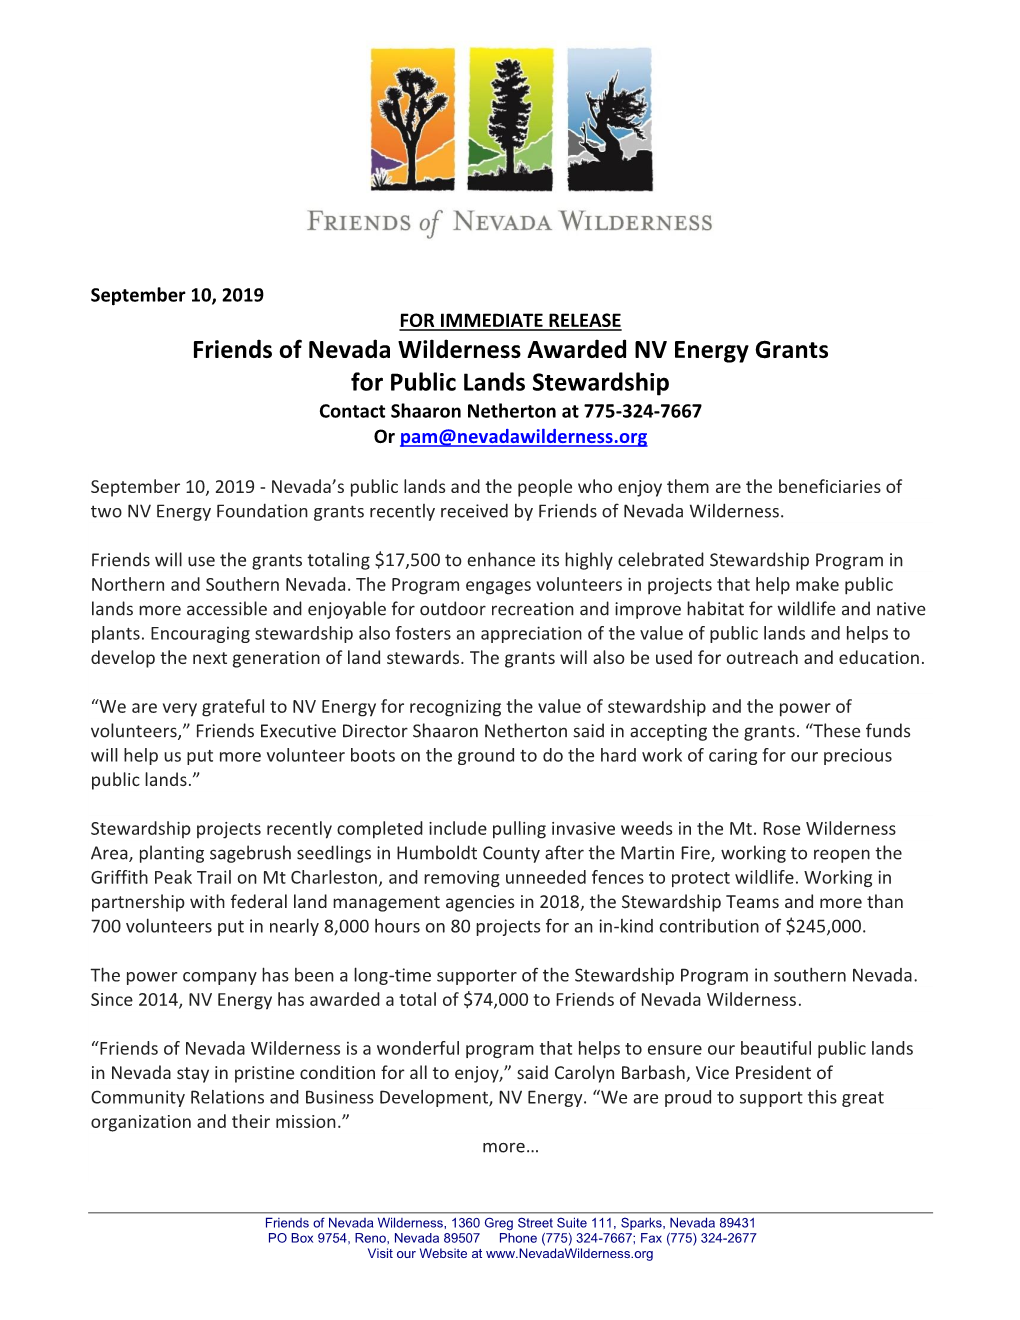 Friends of Nevada Wilderness Awarded NV Energy Grants for Public Lands Stewardship Contact Shaaron Netherton at 775-324-7667 Or Pam@Nevadawilderness.Org